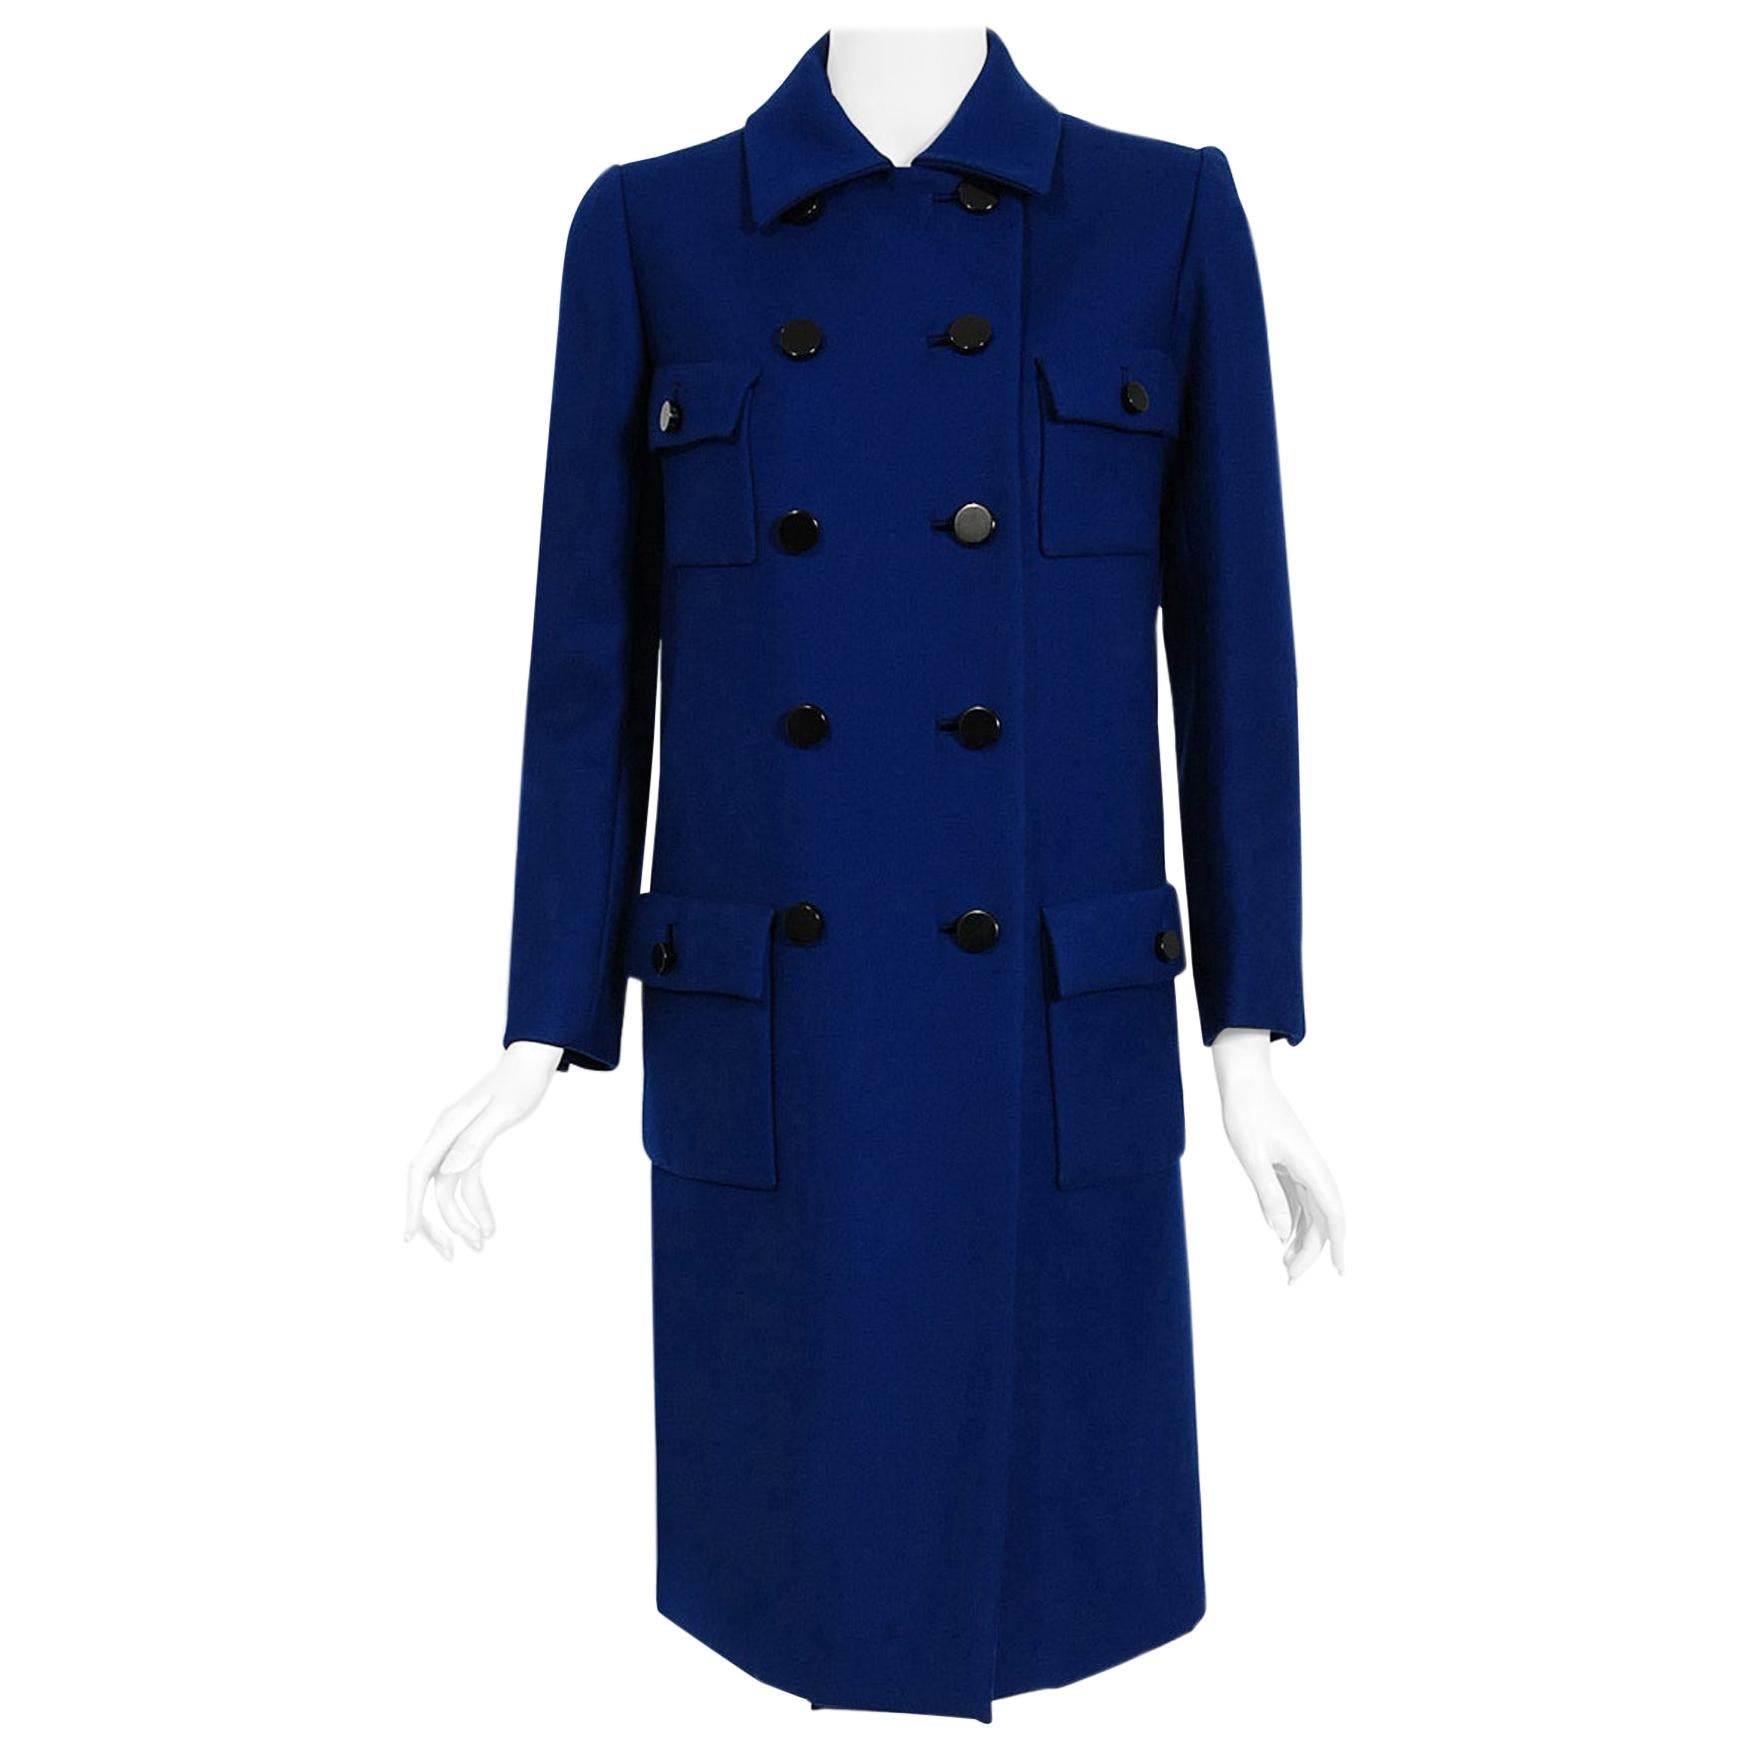 Vintage 1969 Norman Norell Royal Blue Wool Double-Breasted Mod Military Coat